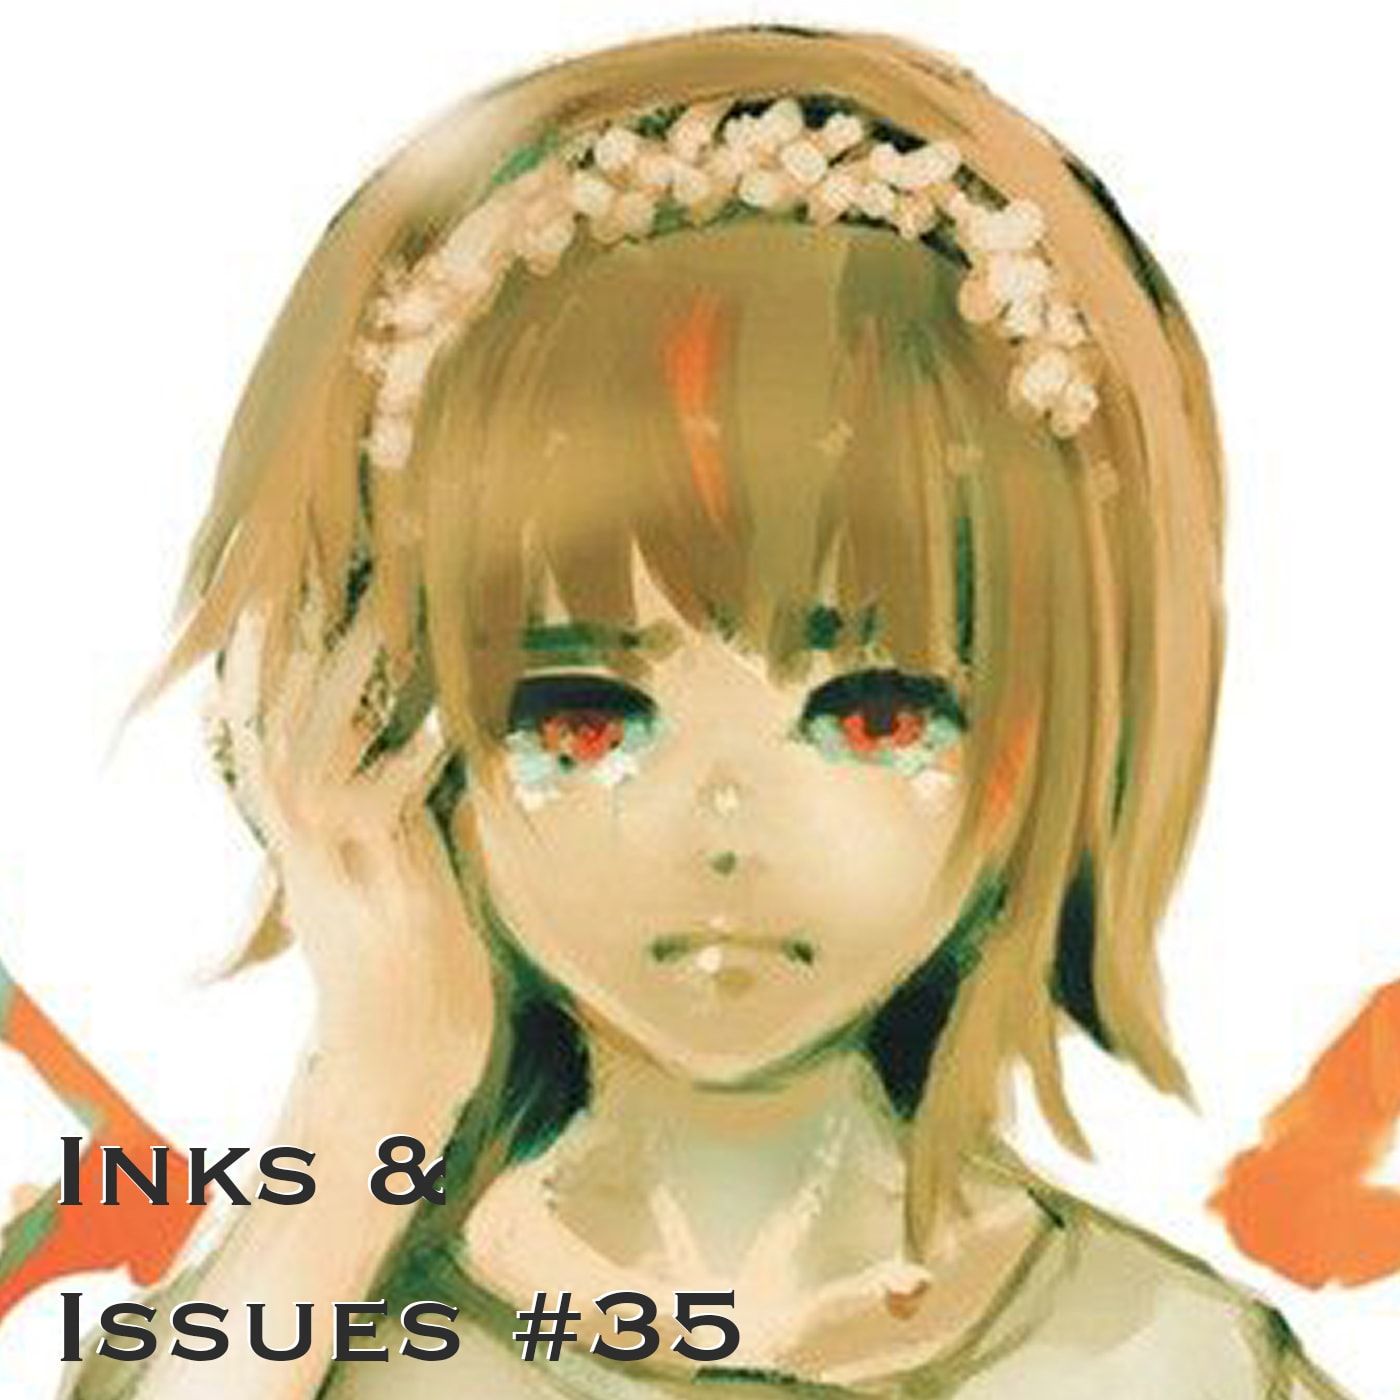 Inks & Issues #36 – Tokyo Ghoul Part 2